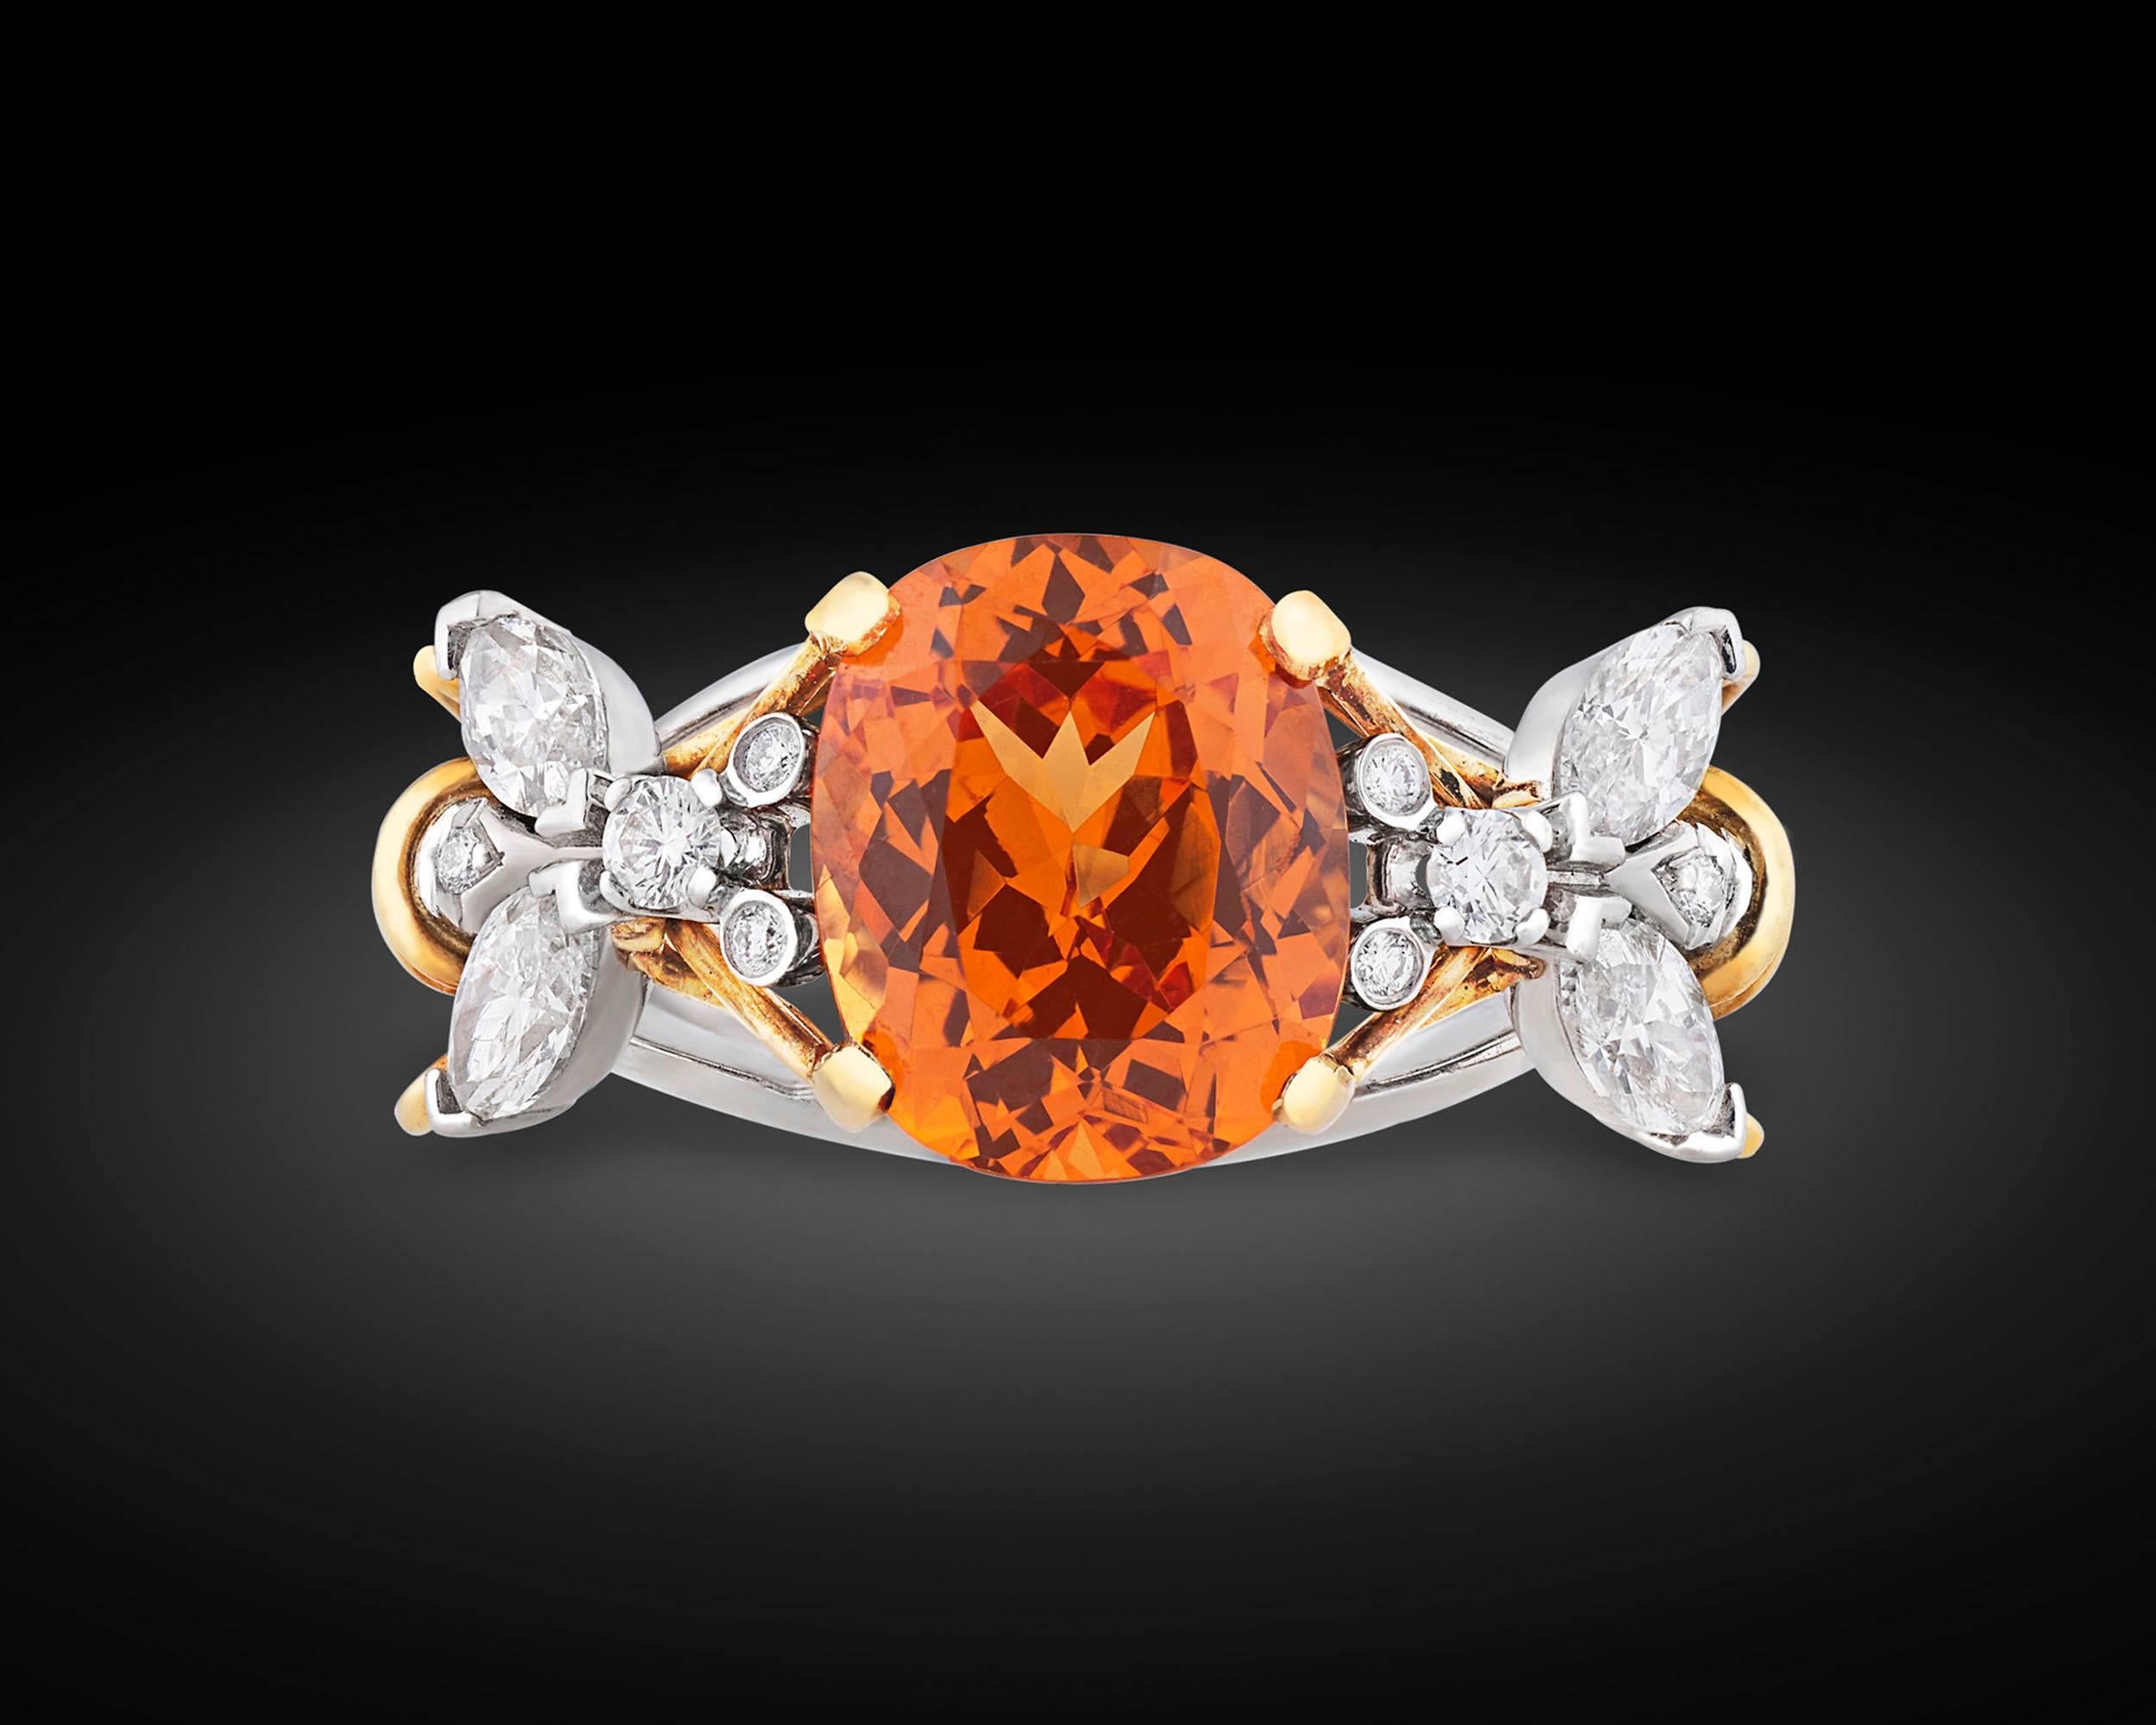 Radiating a beautiful orange hue, a rare spessartite garnet creates quite a buzz in this enchanting ring by Tiffany & Co. Designed by the legendary Jean Schlumberger, this striking design centers around the dazzling 5.49-carat spessartite, which is